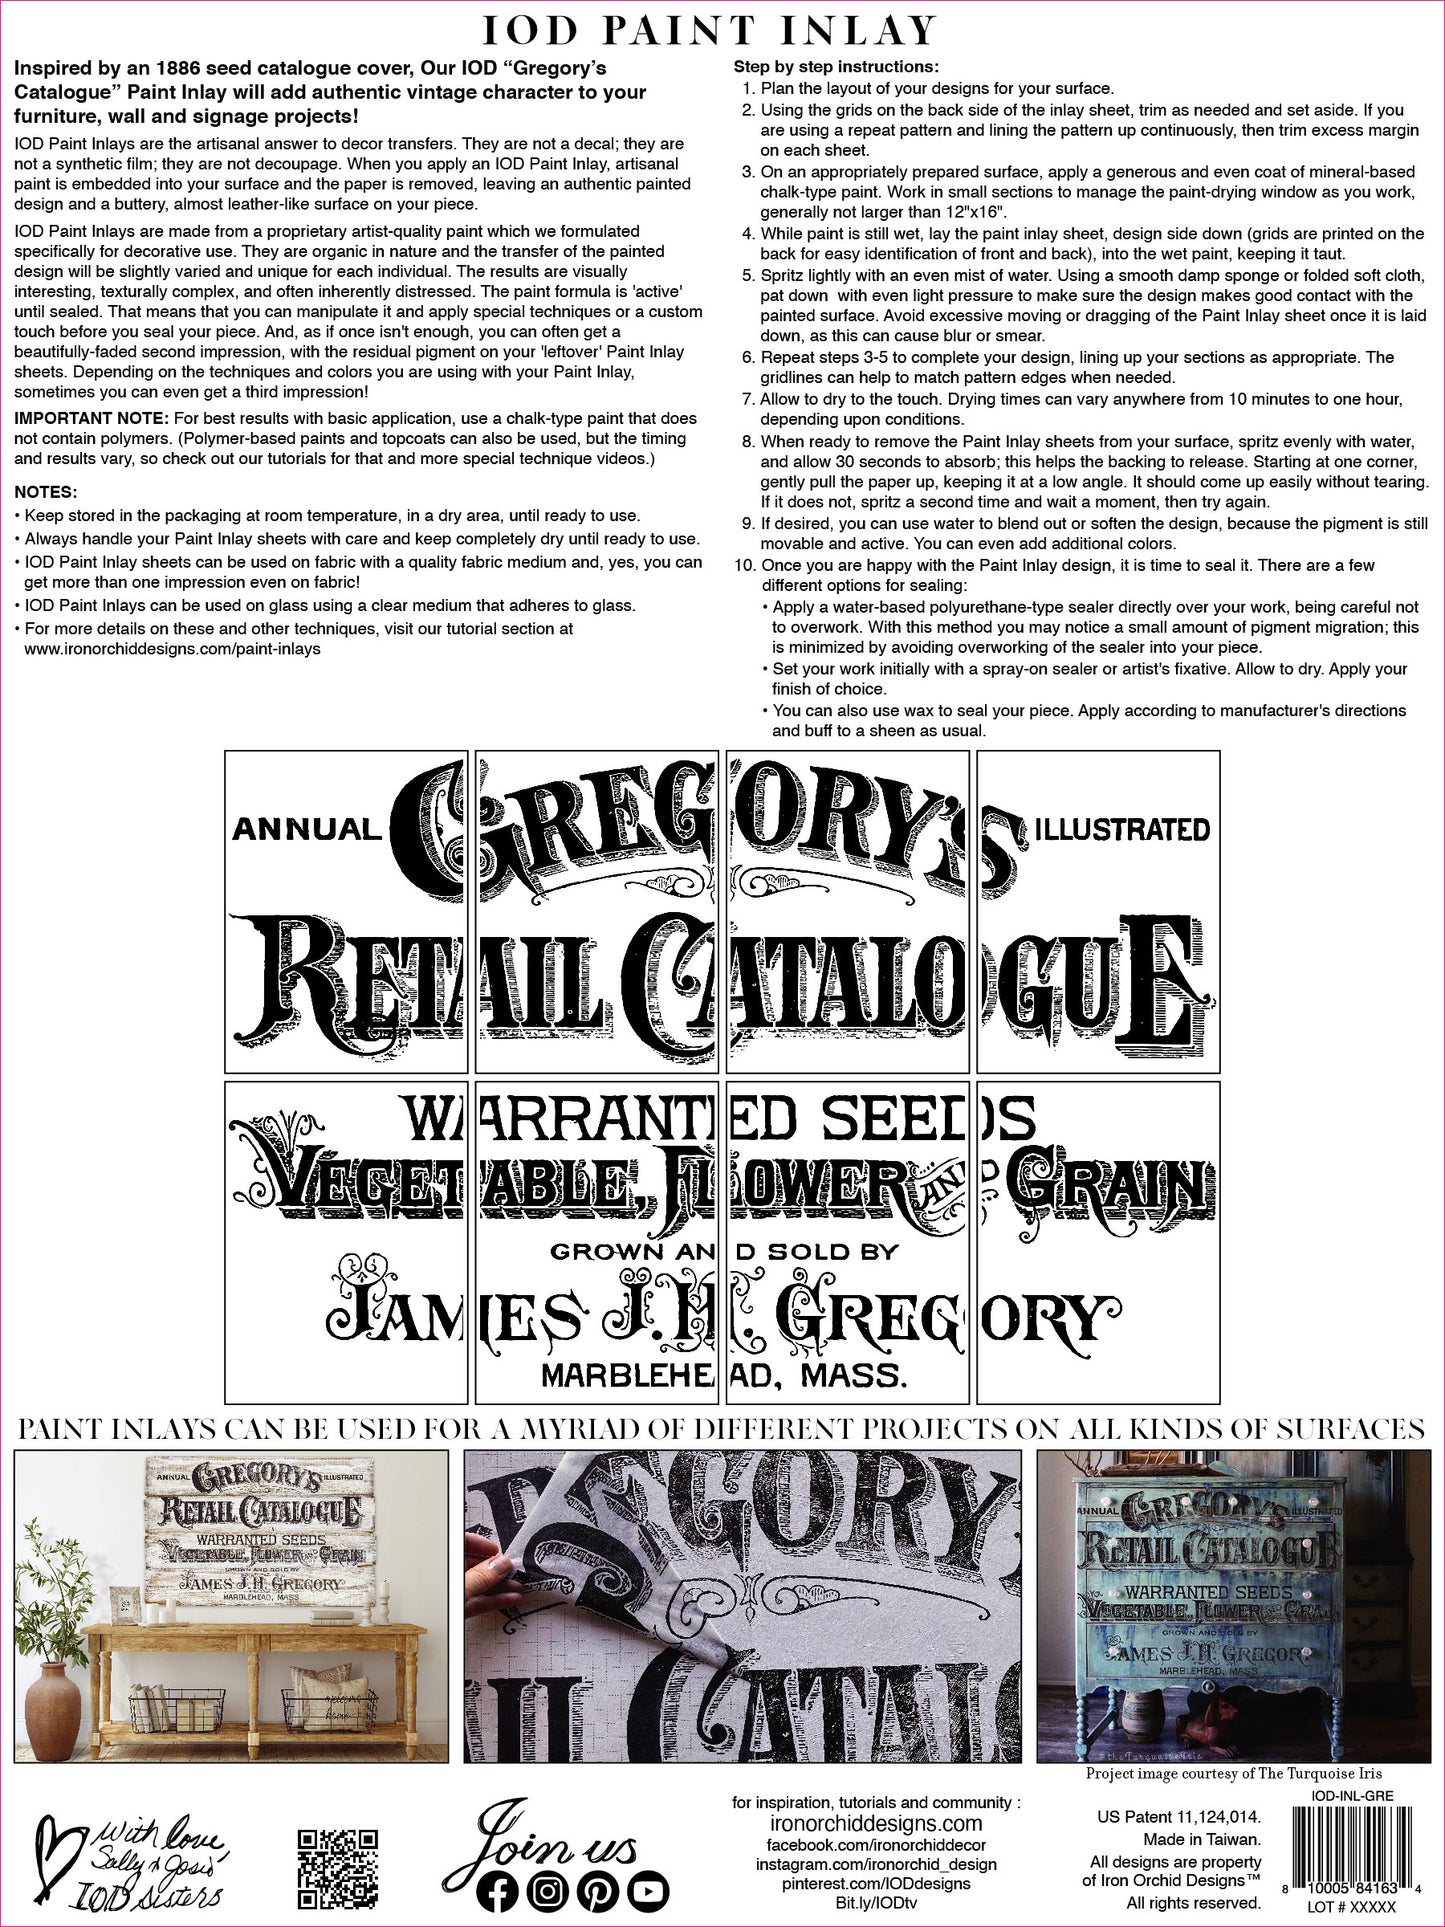 Gregory's Catalog